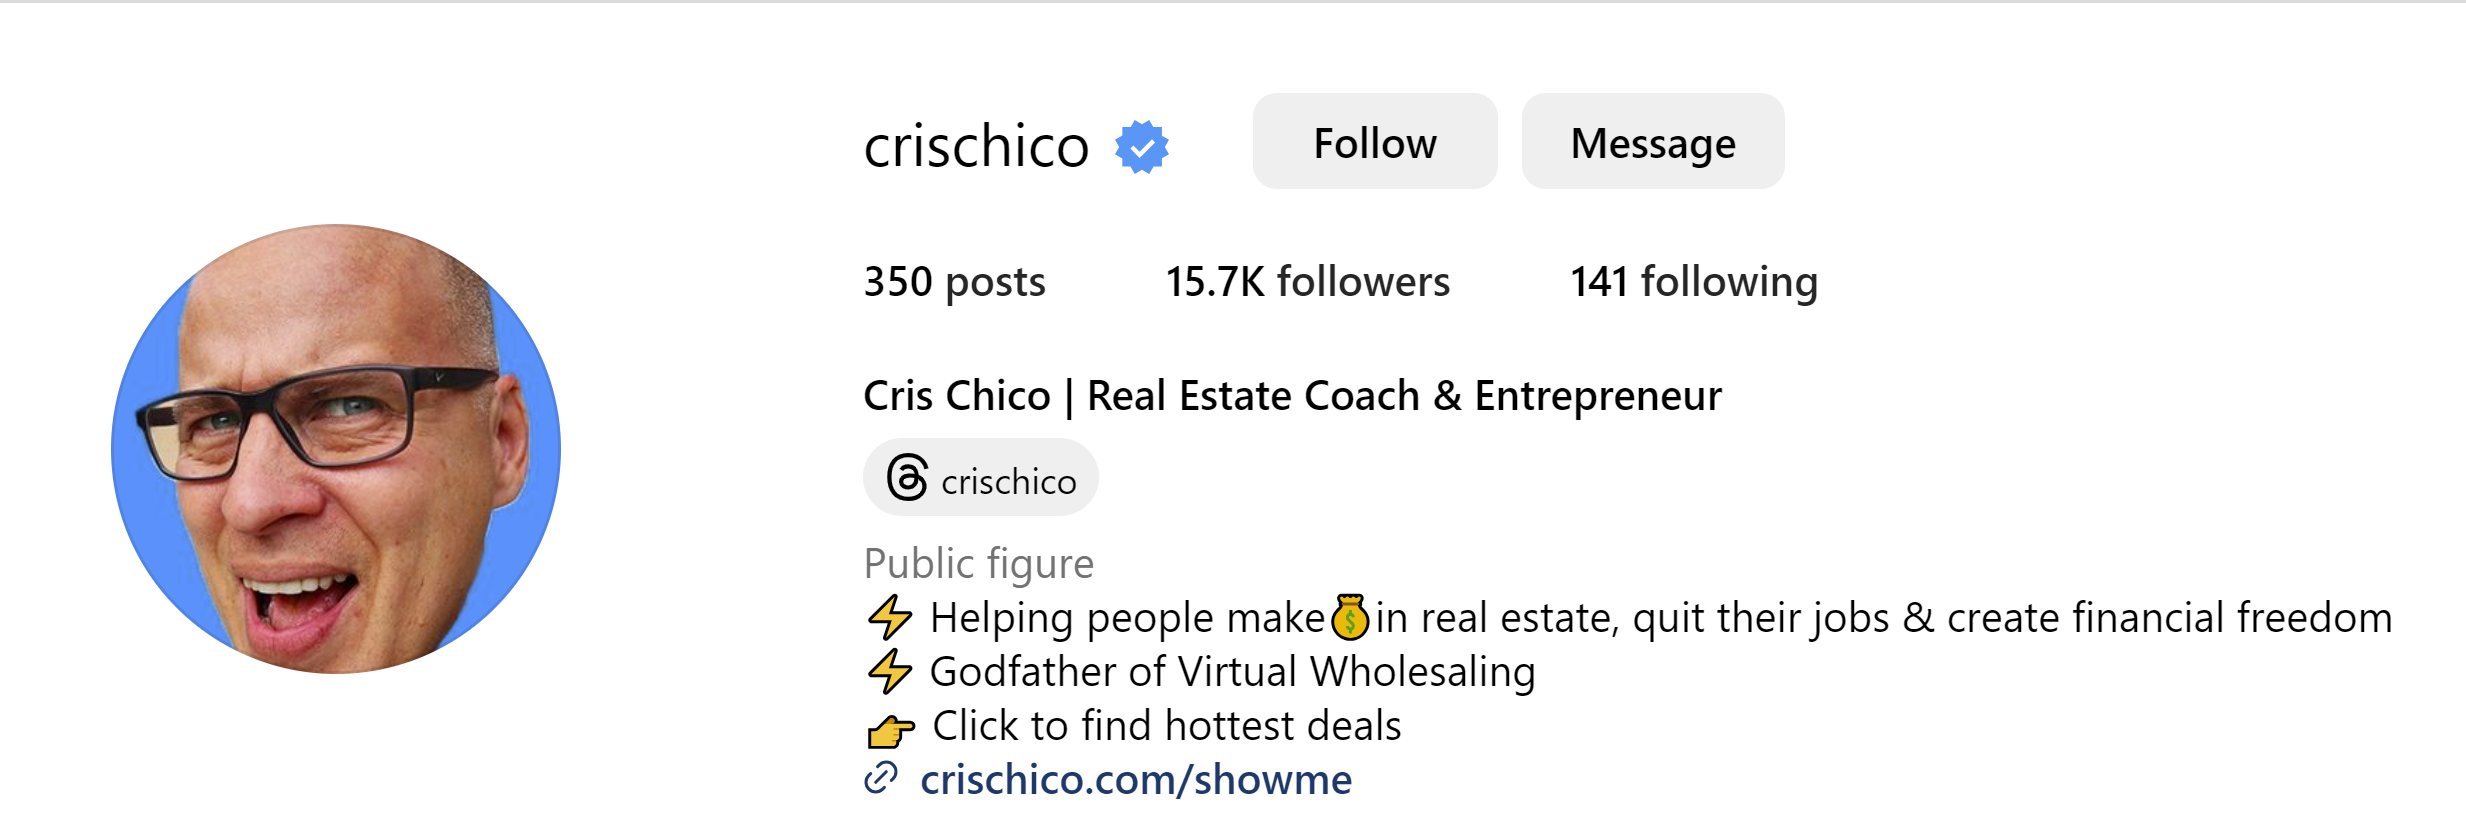 Who Is Cris Chico